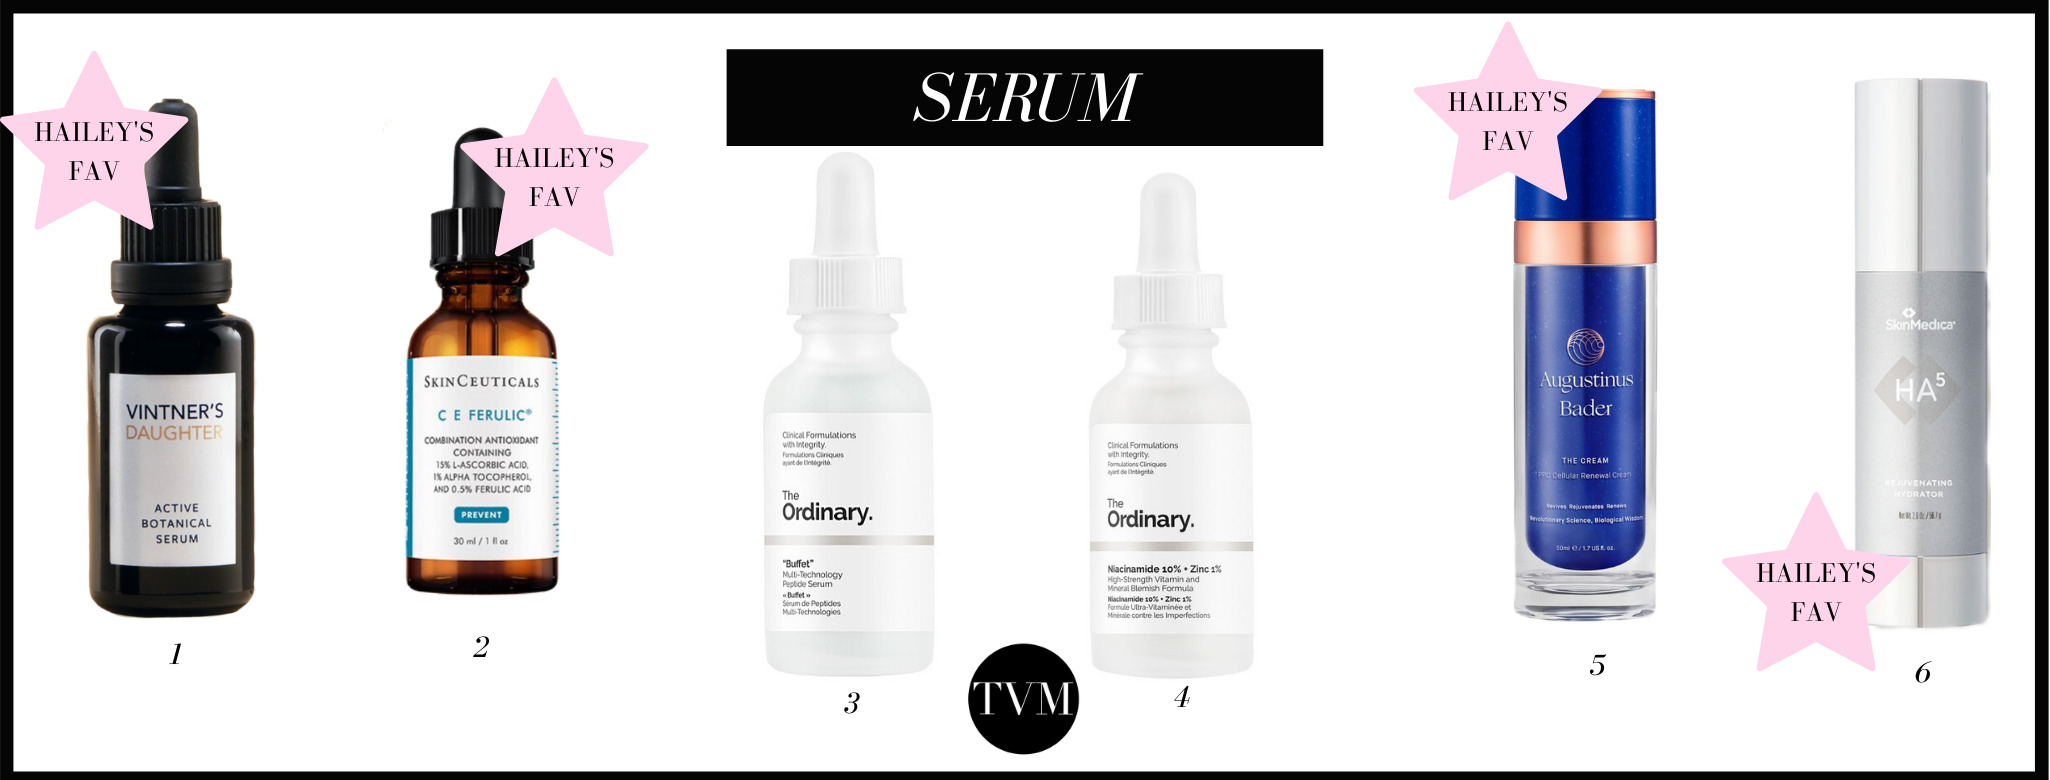 Once that’s been rinsed off, the third step in Hailey Bieber Skincare Routine consists of applying her favourite serums and moisturisers (1, 2, 5 and 6). The components that these serums are the same as these ones from the brand The Ordinary, which is a super good and affordable brand that specializes in serums and acids! Hailey loves moisturising serums with niacinamide, so number 4 is perfect, contains zinc and niacinamide! Buffet serum (3) is also perfect since it combines a mixture of good acids that will make your skin flawless!   After serums, Hailey applies a light layer of moisturiser! Moisturiser is key to a perfect glowy and flawless skin!